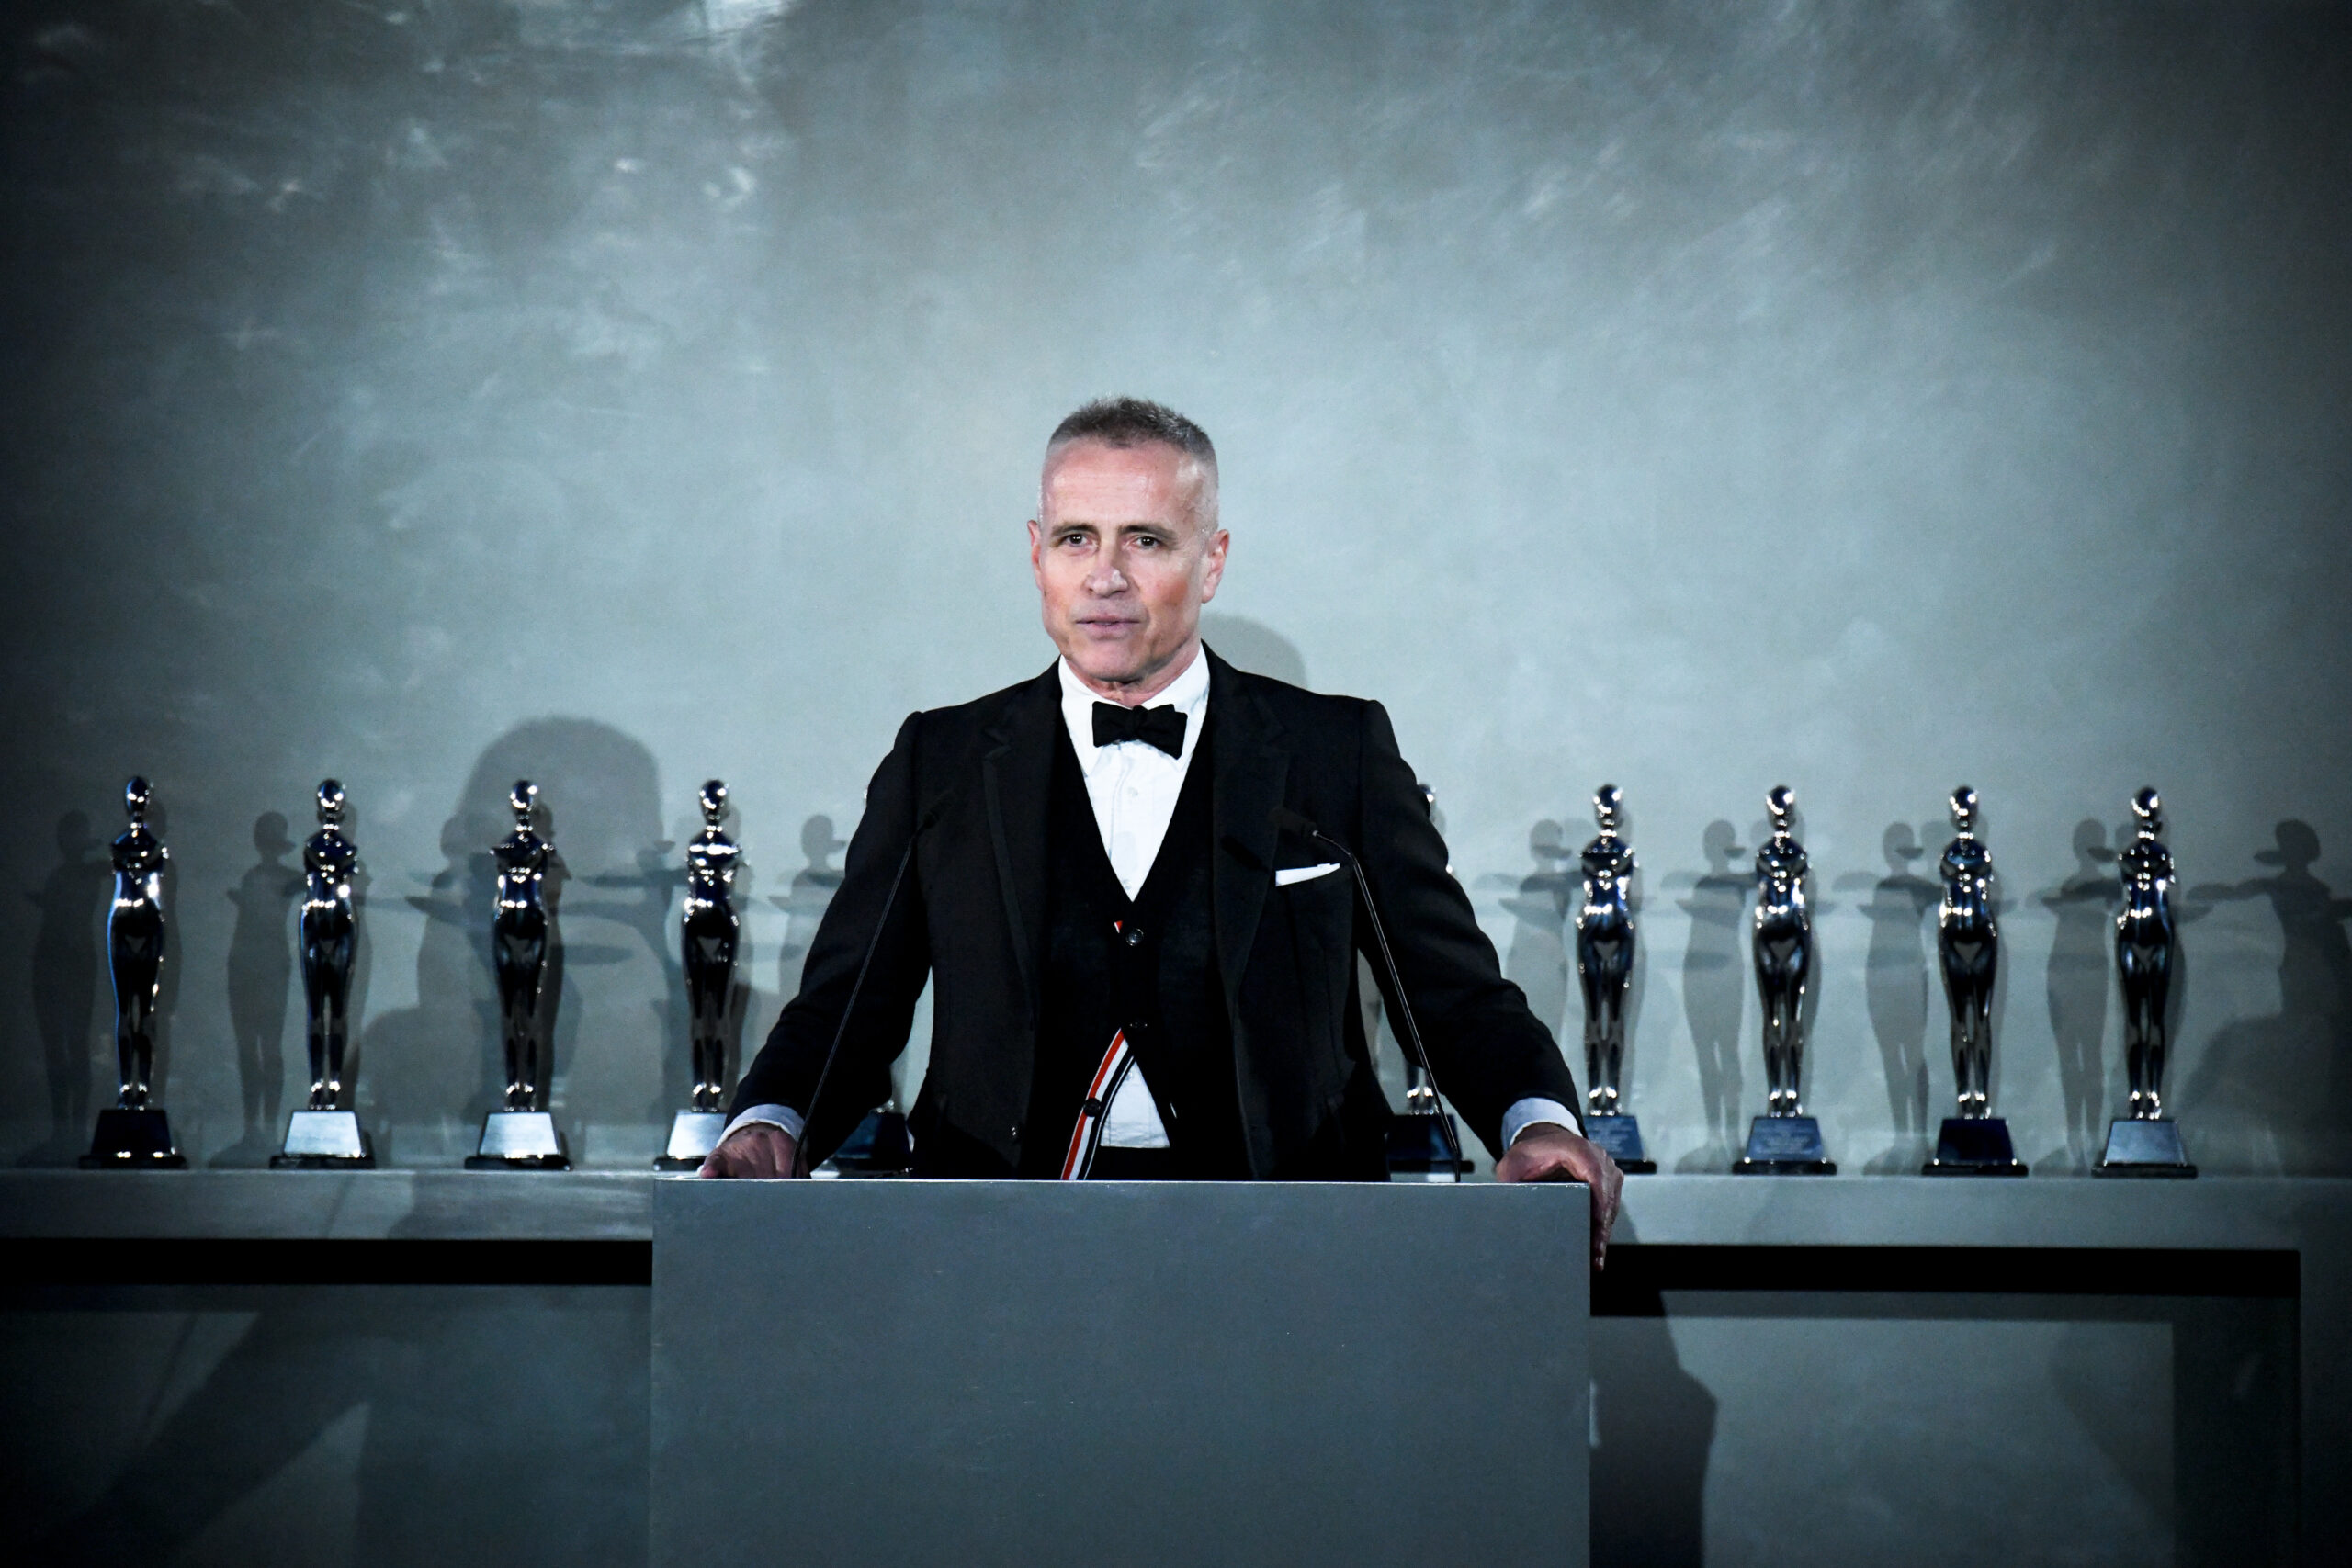 CFDA Chairman Thom Browne stands ready at the podium, with the evening's coveted awards lined up behind him, set to celebrate the industry's top talents at the prestigious CFDA Fashion Awards presented by Amazon.